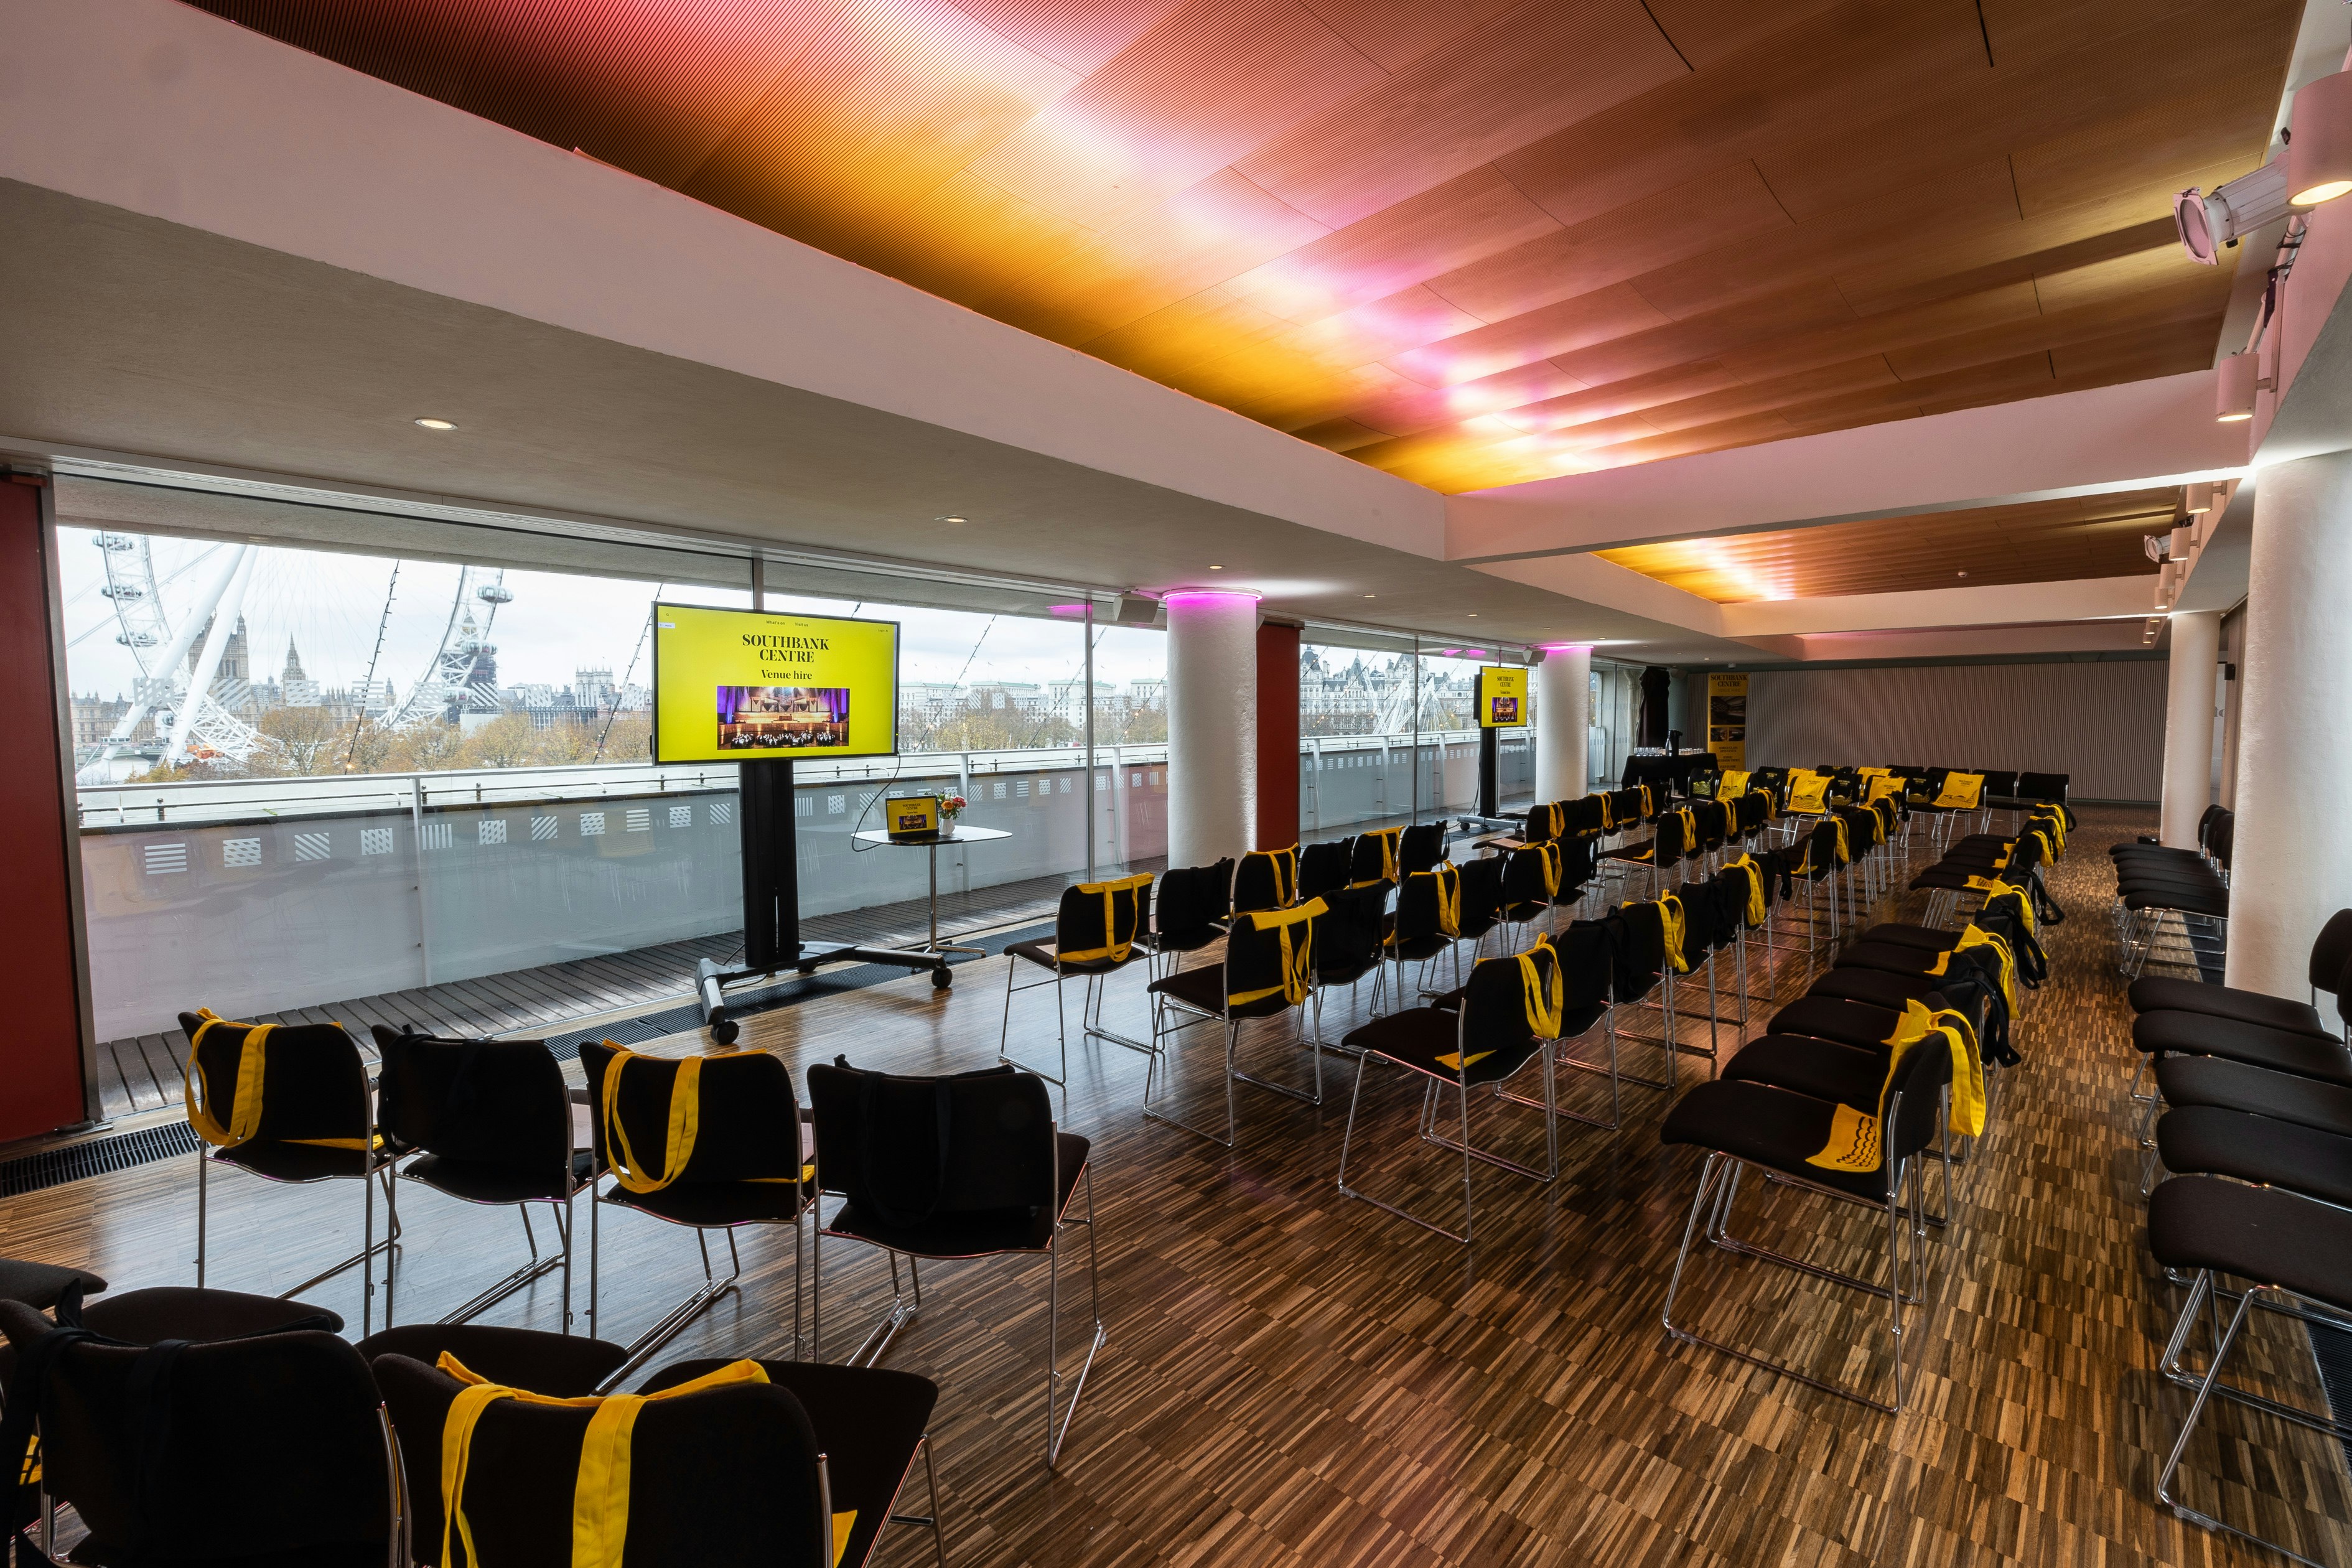 Private Dining Rooms With A View Venues in London - Southbank Centre